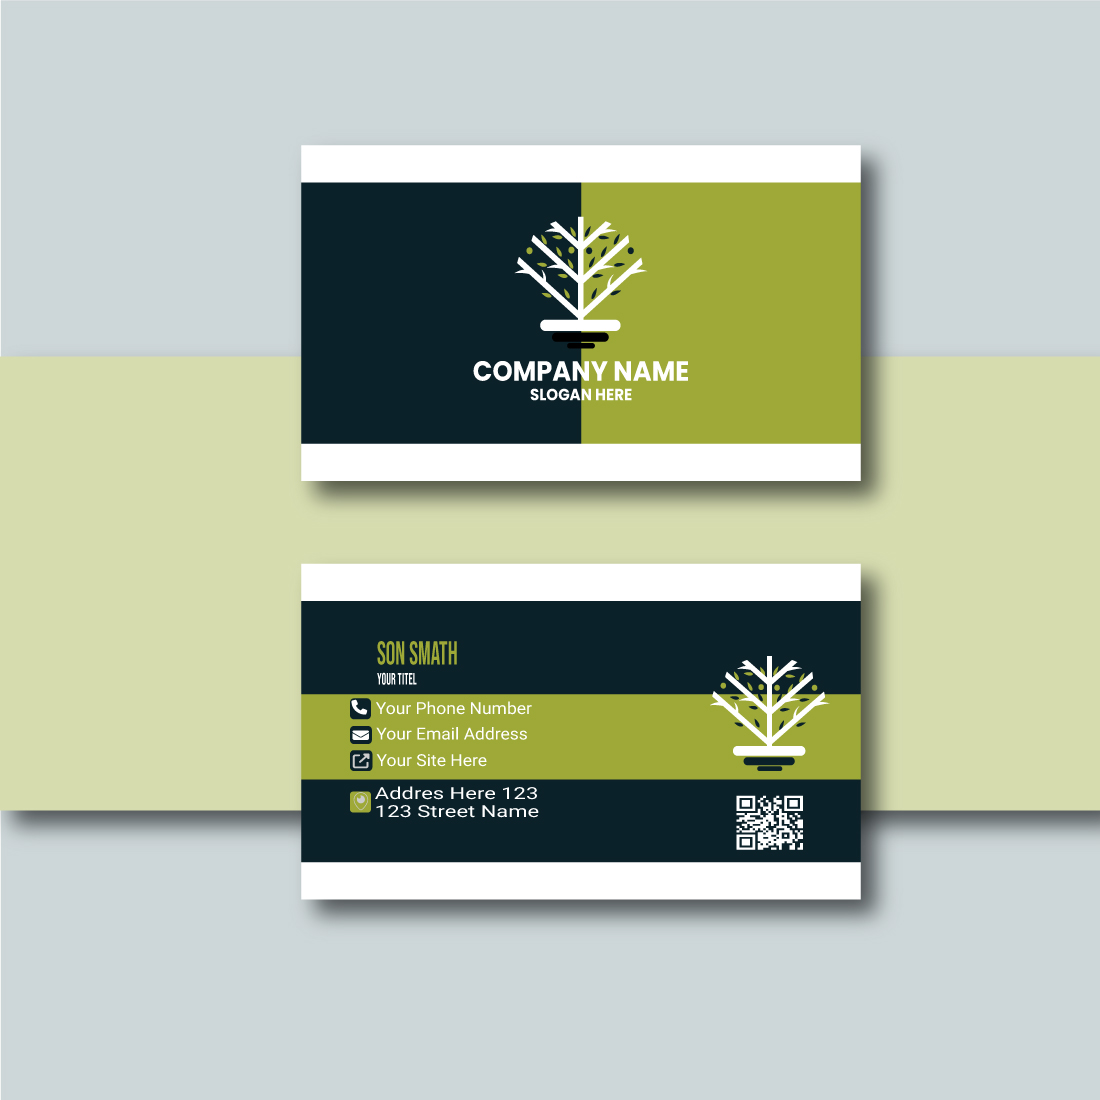 Creative Business Card Design cover image.